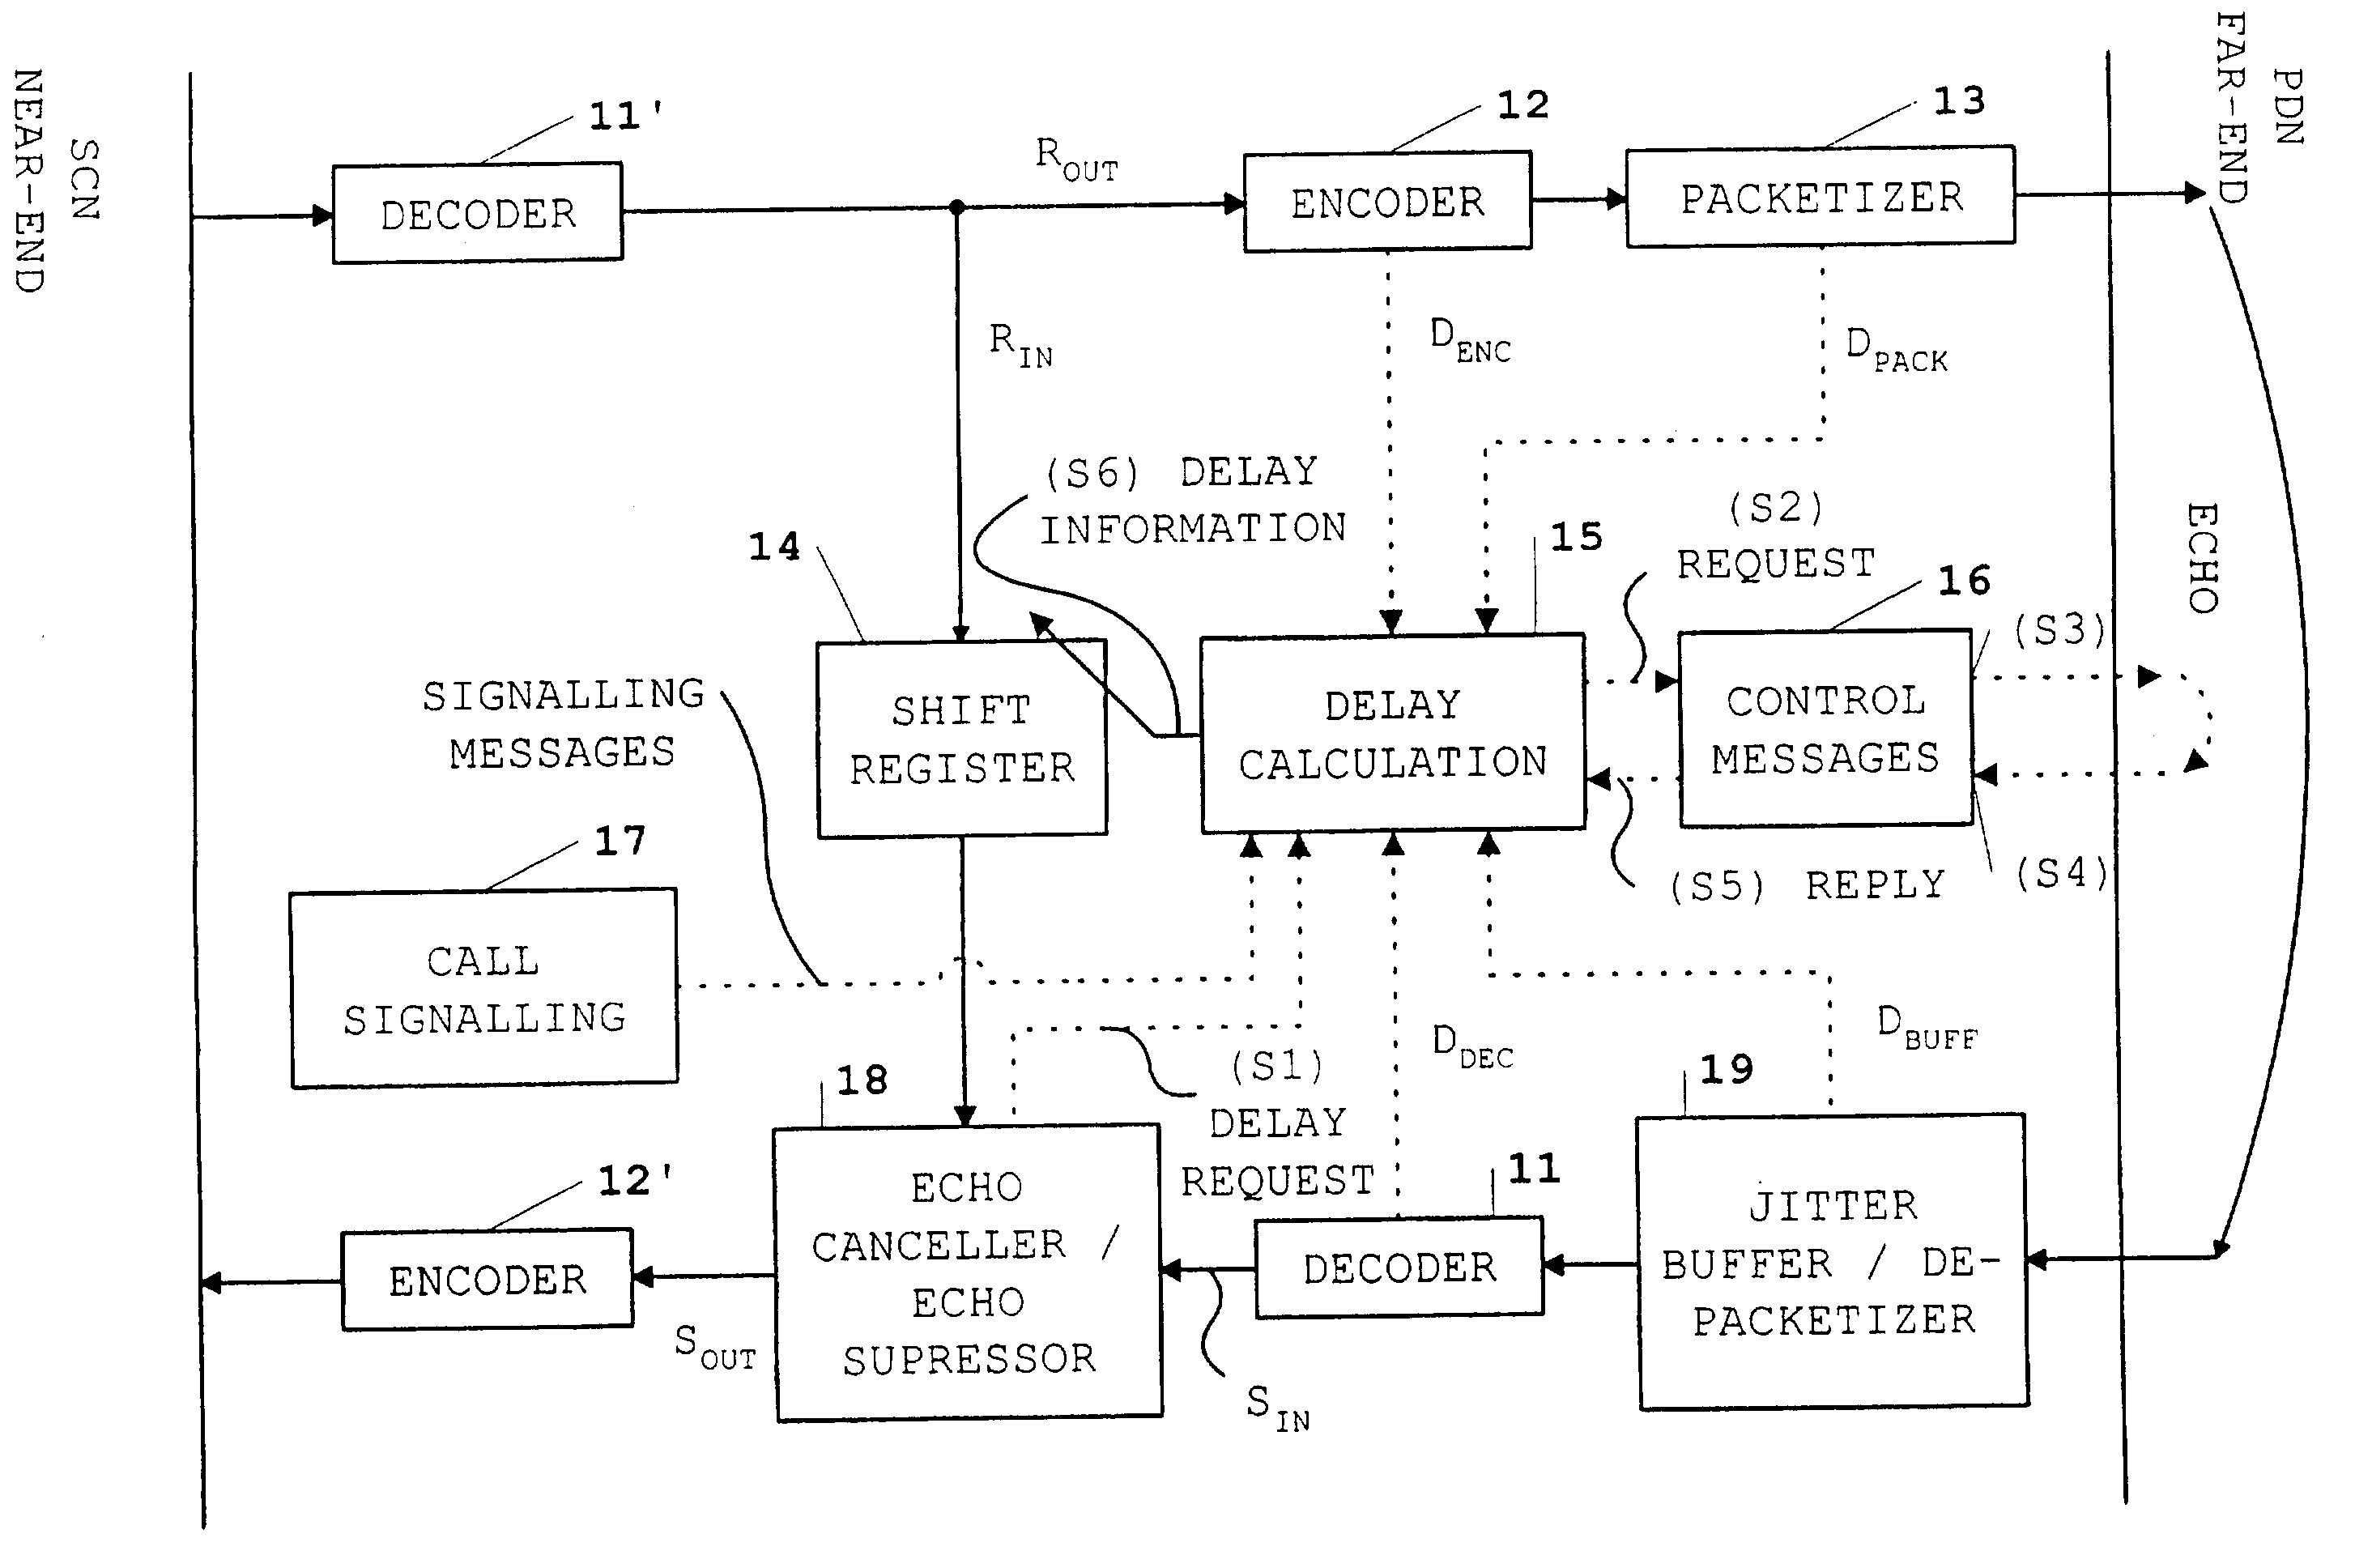 Delay measurement system in a packet network